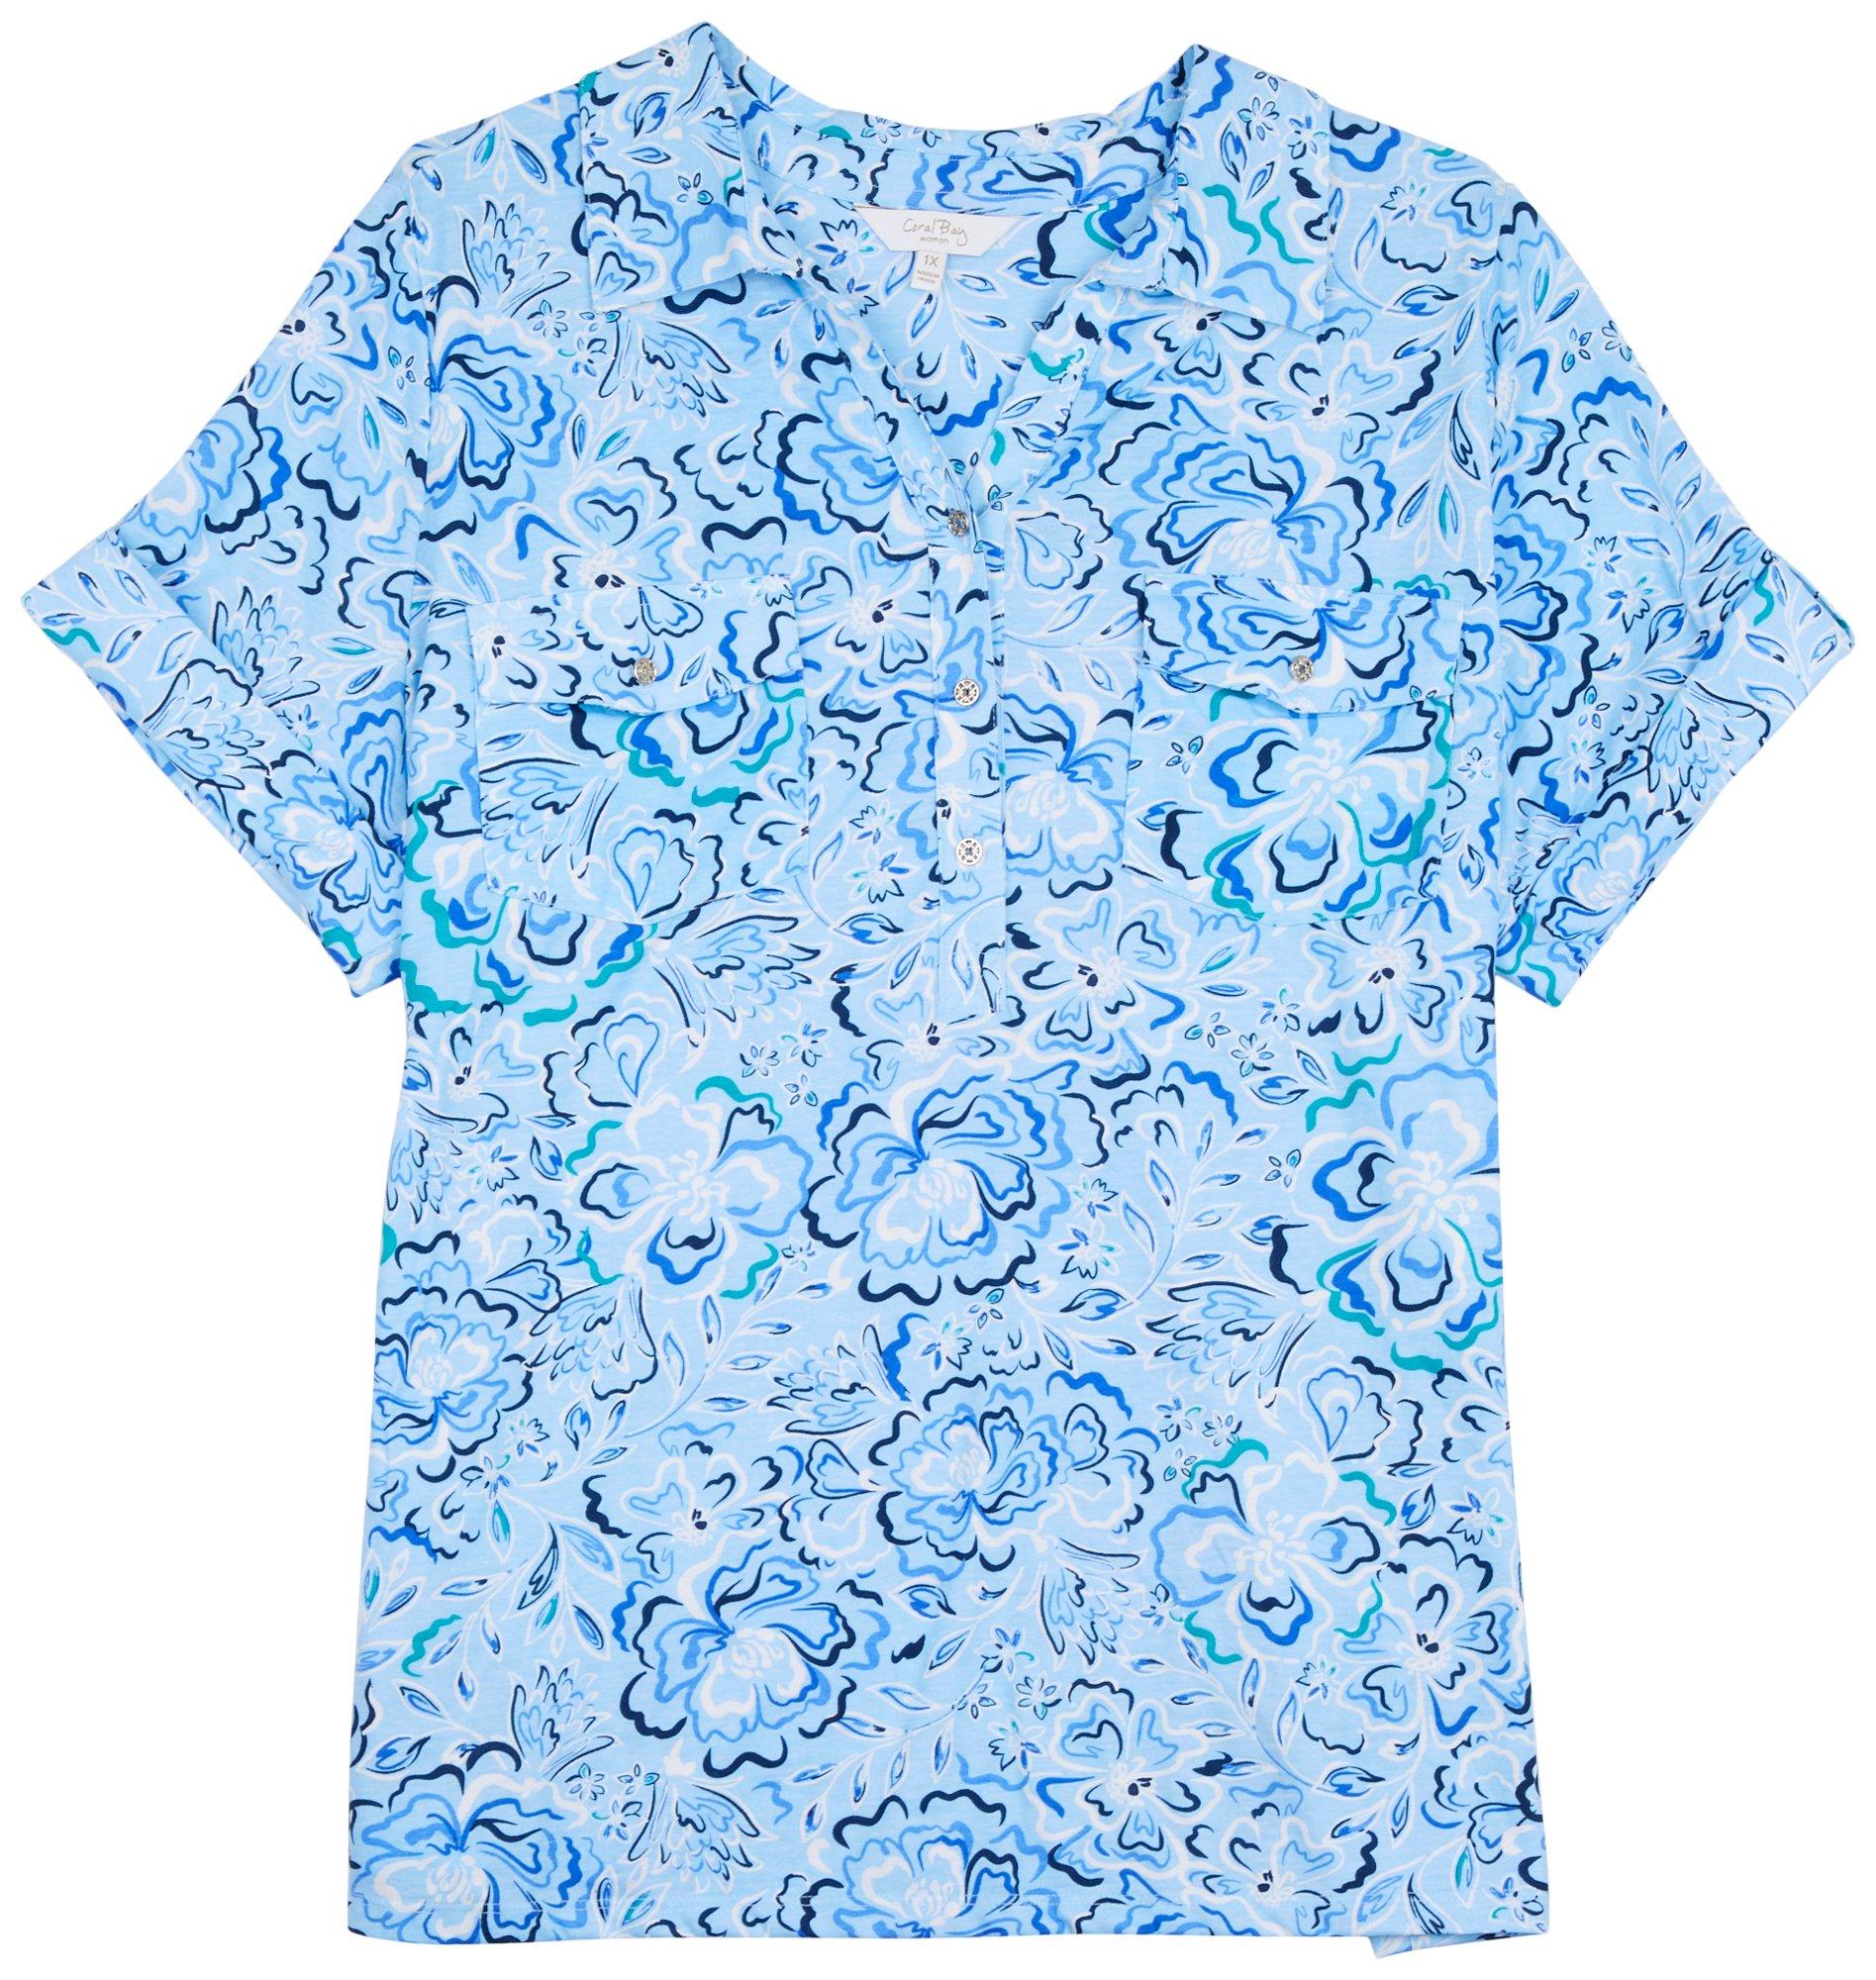 Coral Bay Plus Print Two-Pocket Short Sleeve Polo